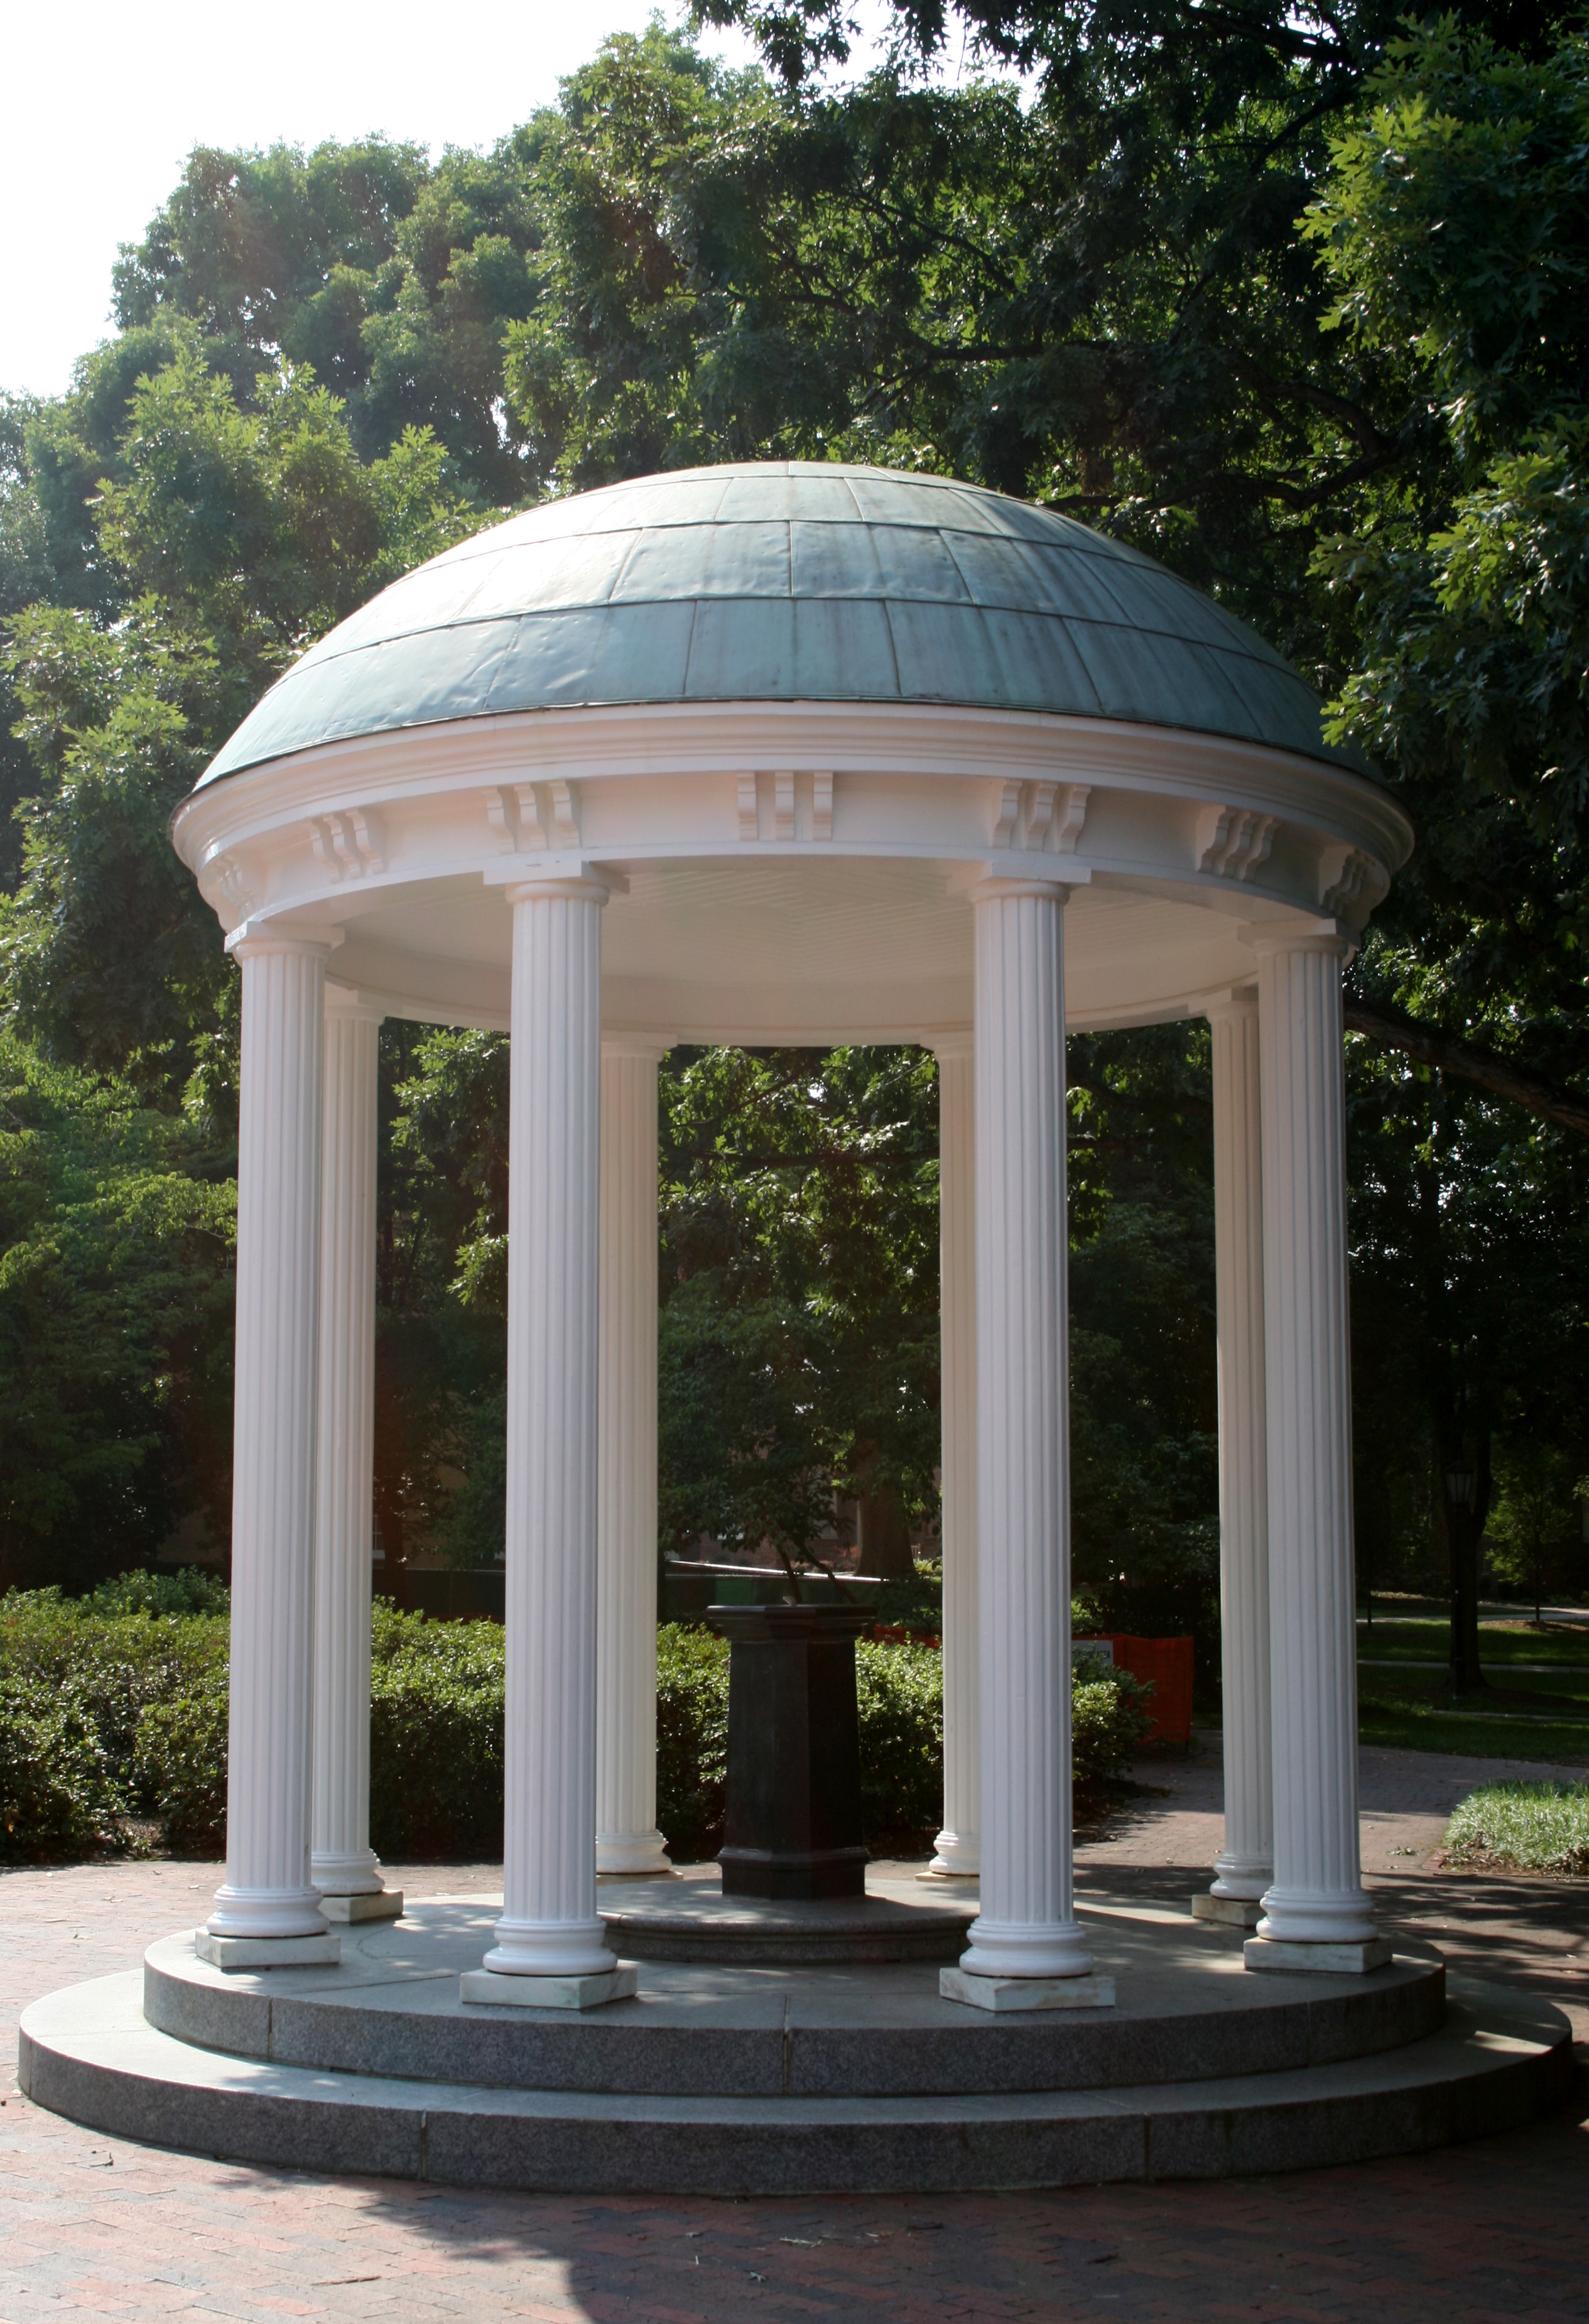 2008-07-11_UNC-CH_Old_Well_in_the_sun.jpg